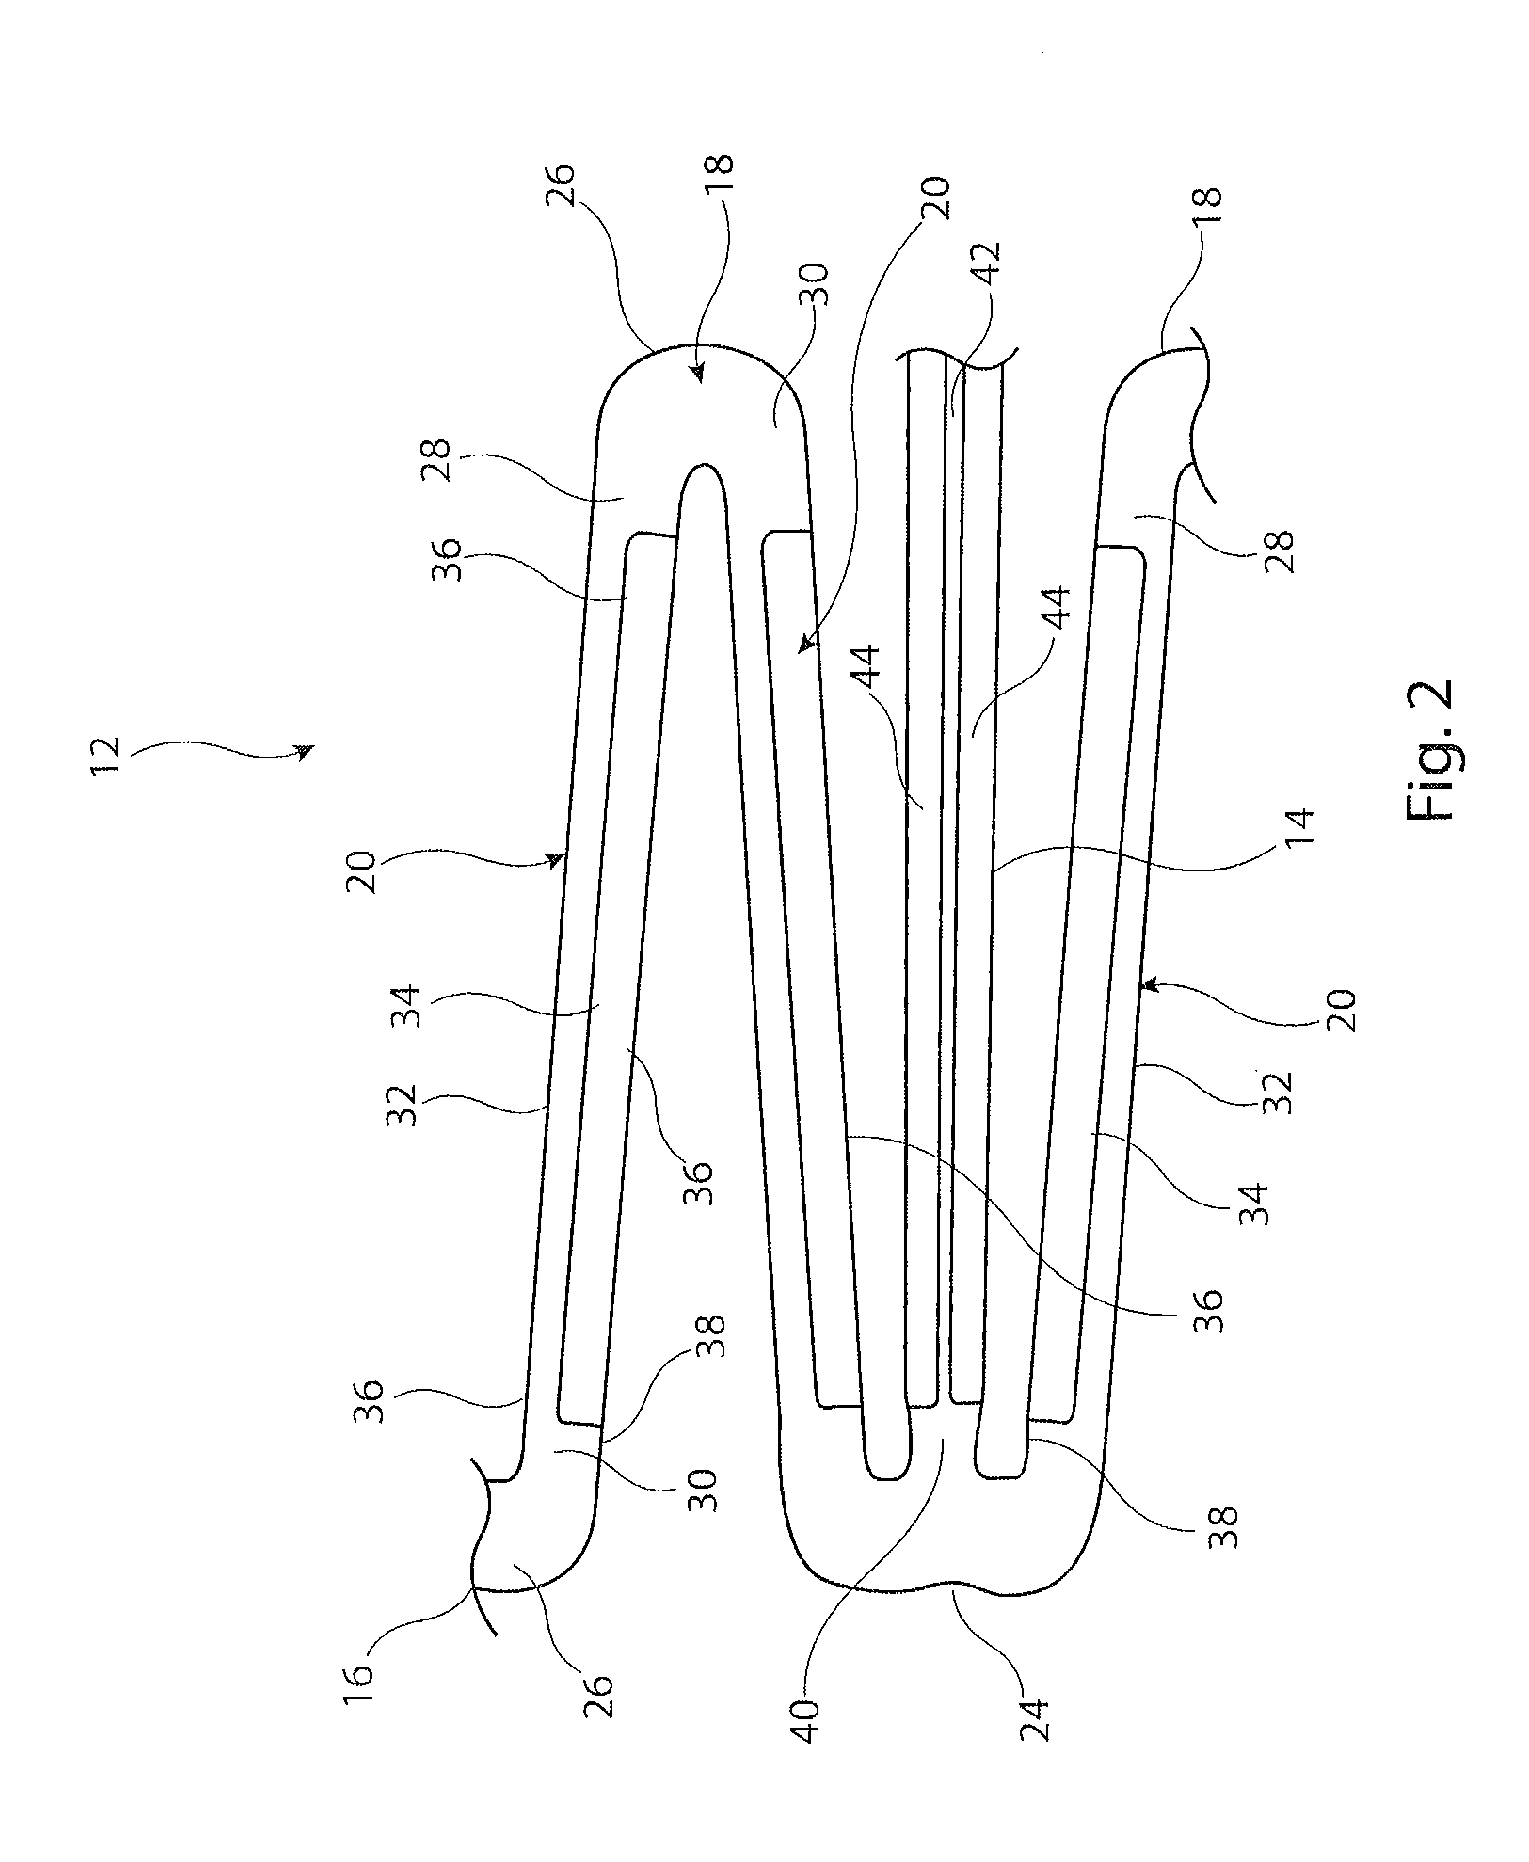 Bioabsorbable stent and implantable medical device